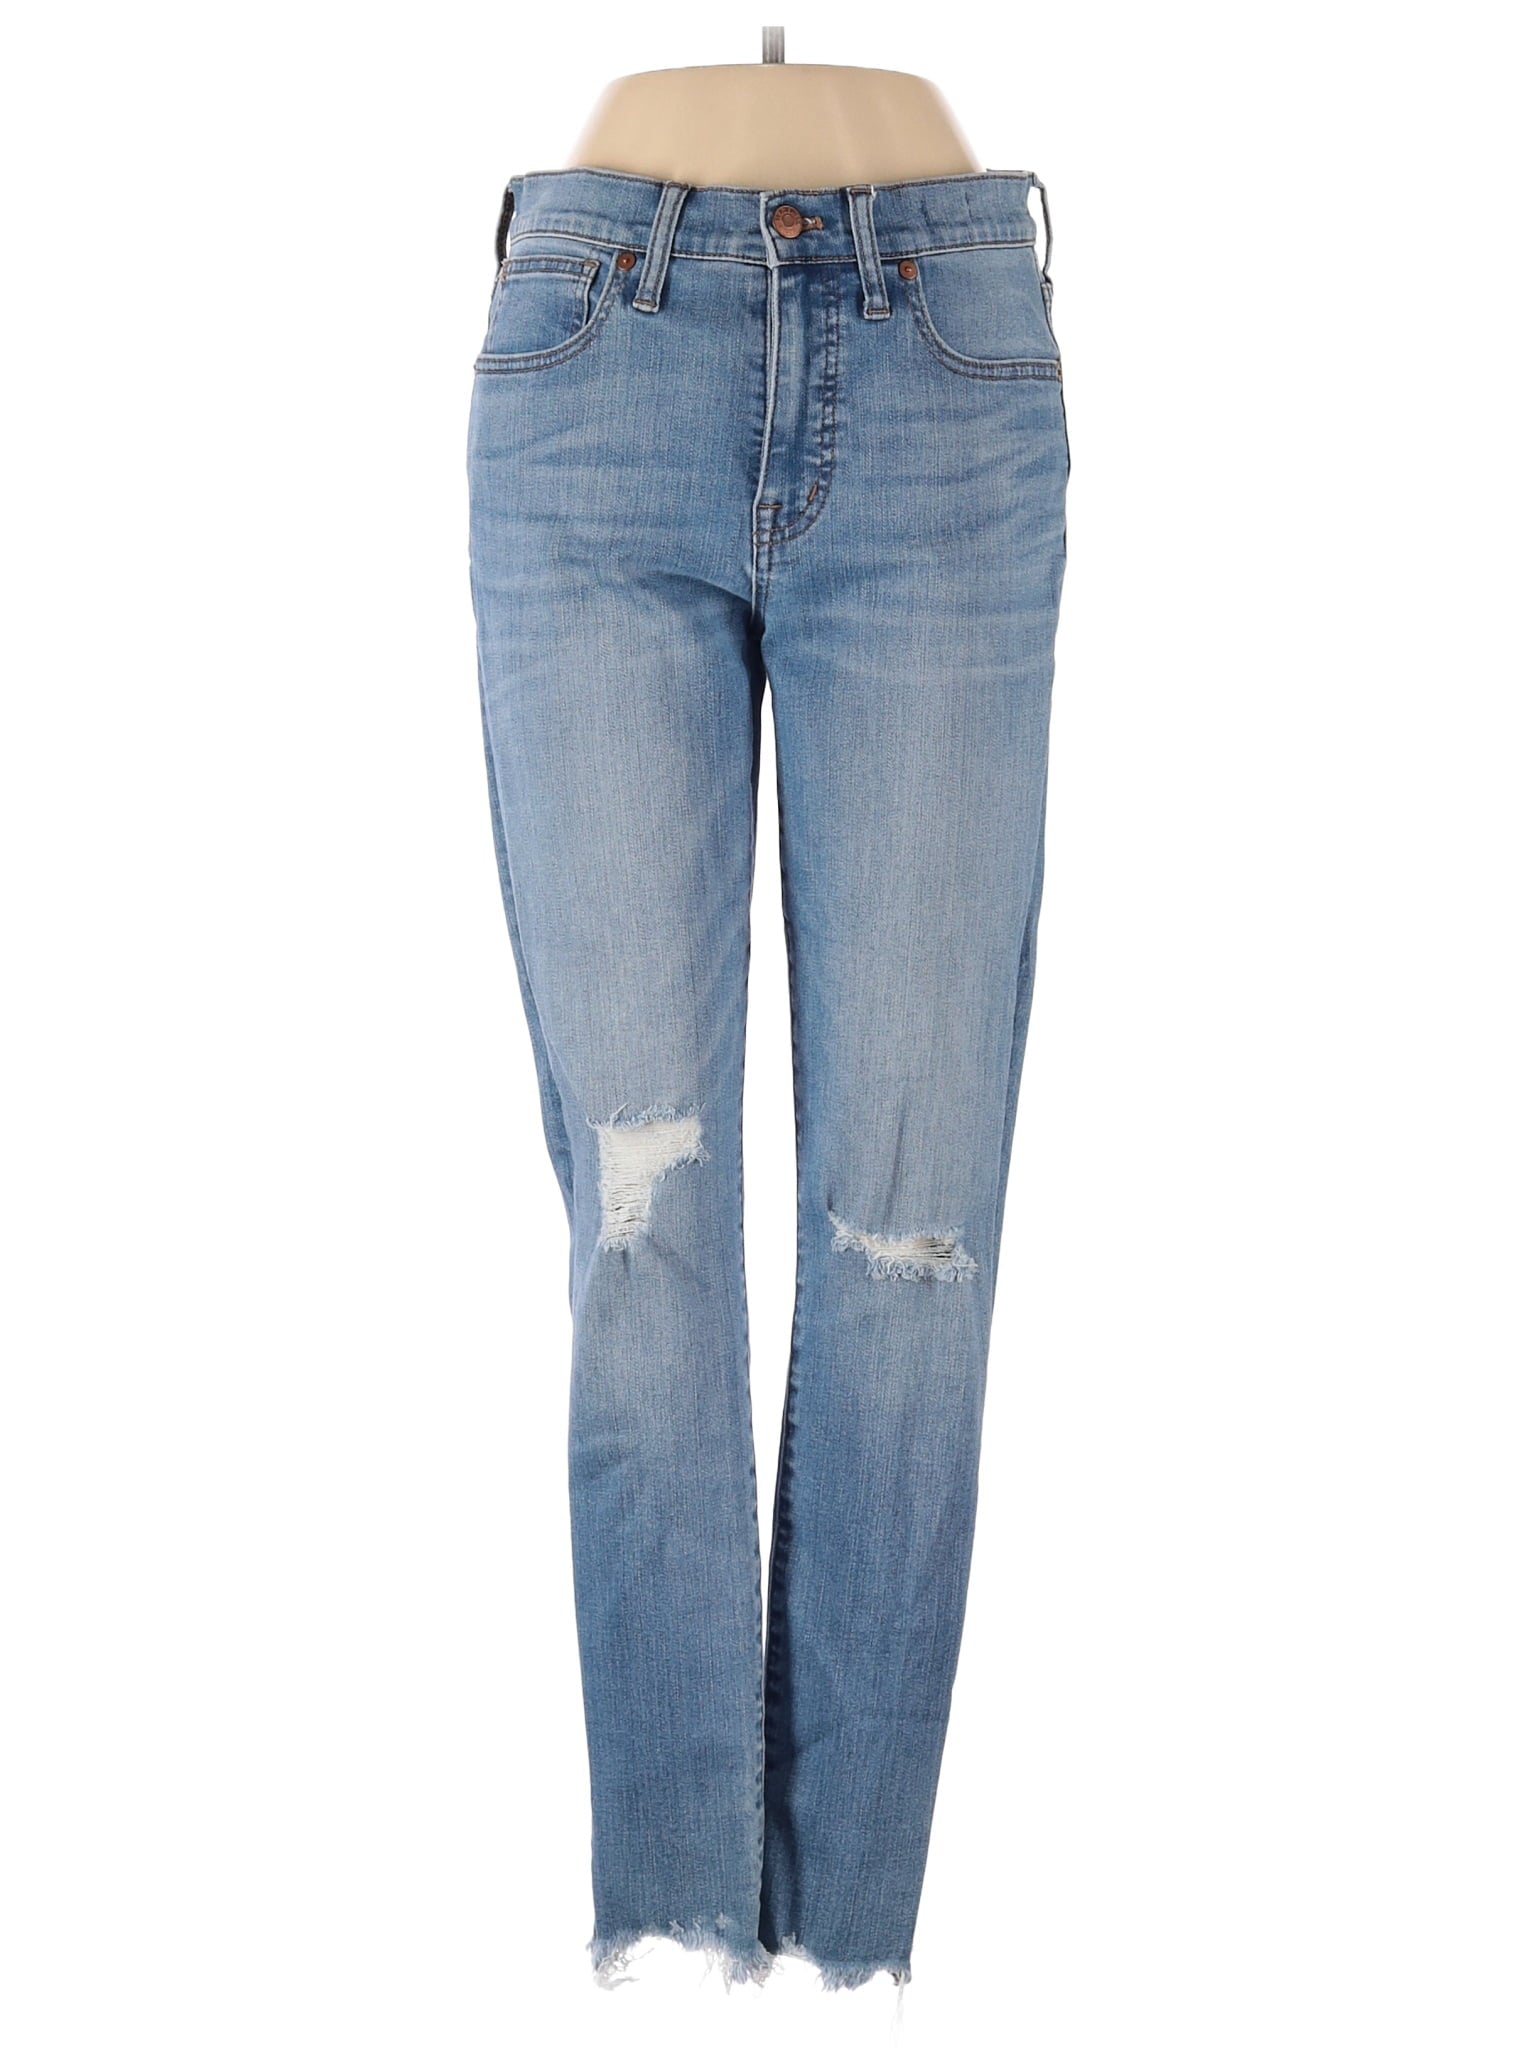 Mid-Rise Skinny 9" Mid-Rise Skinny Jeans In Frankie Wash: Torn-Knee Edition in Medium Wash waist size - 27